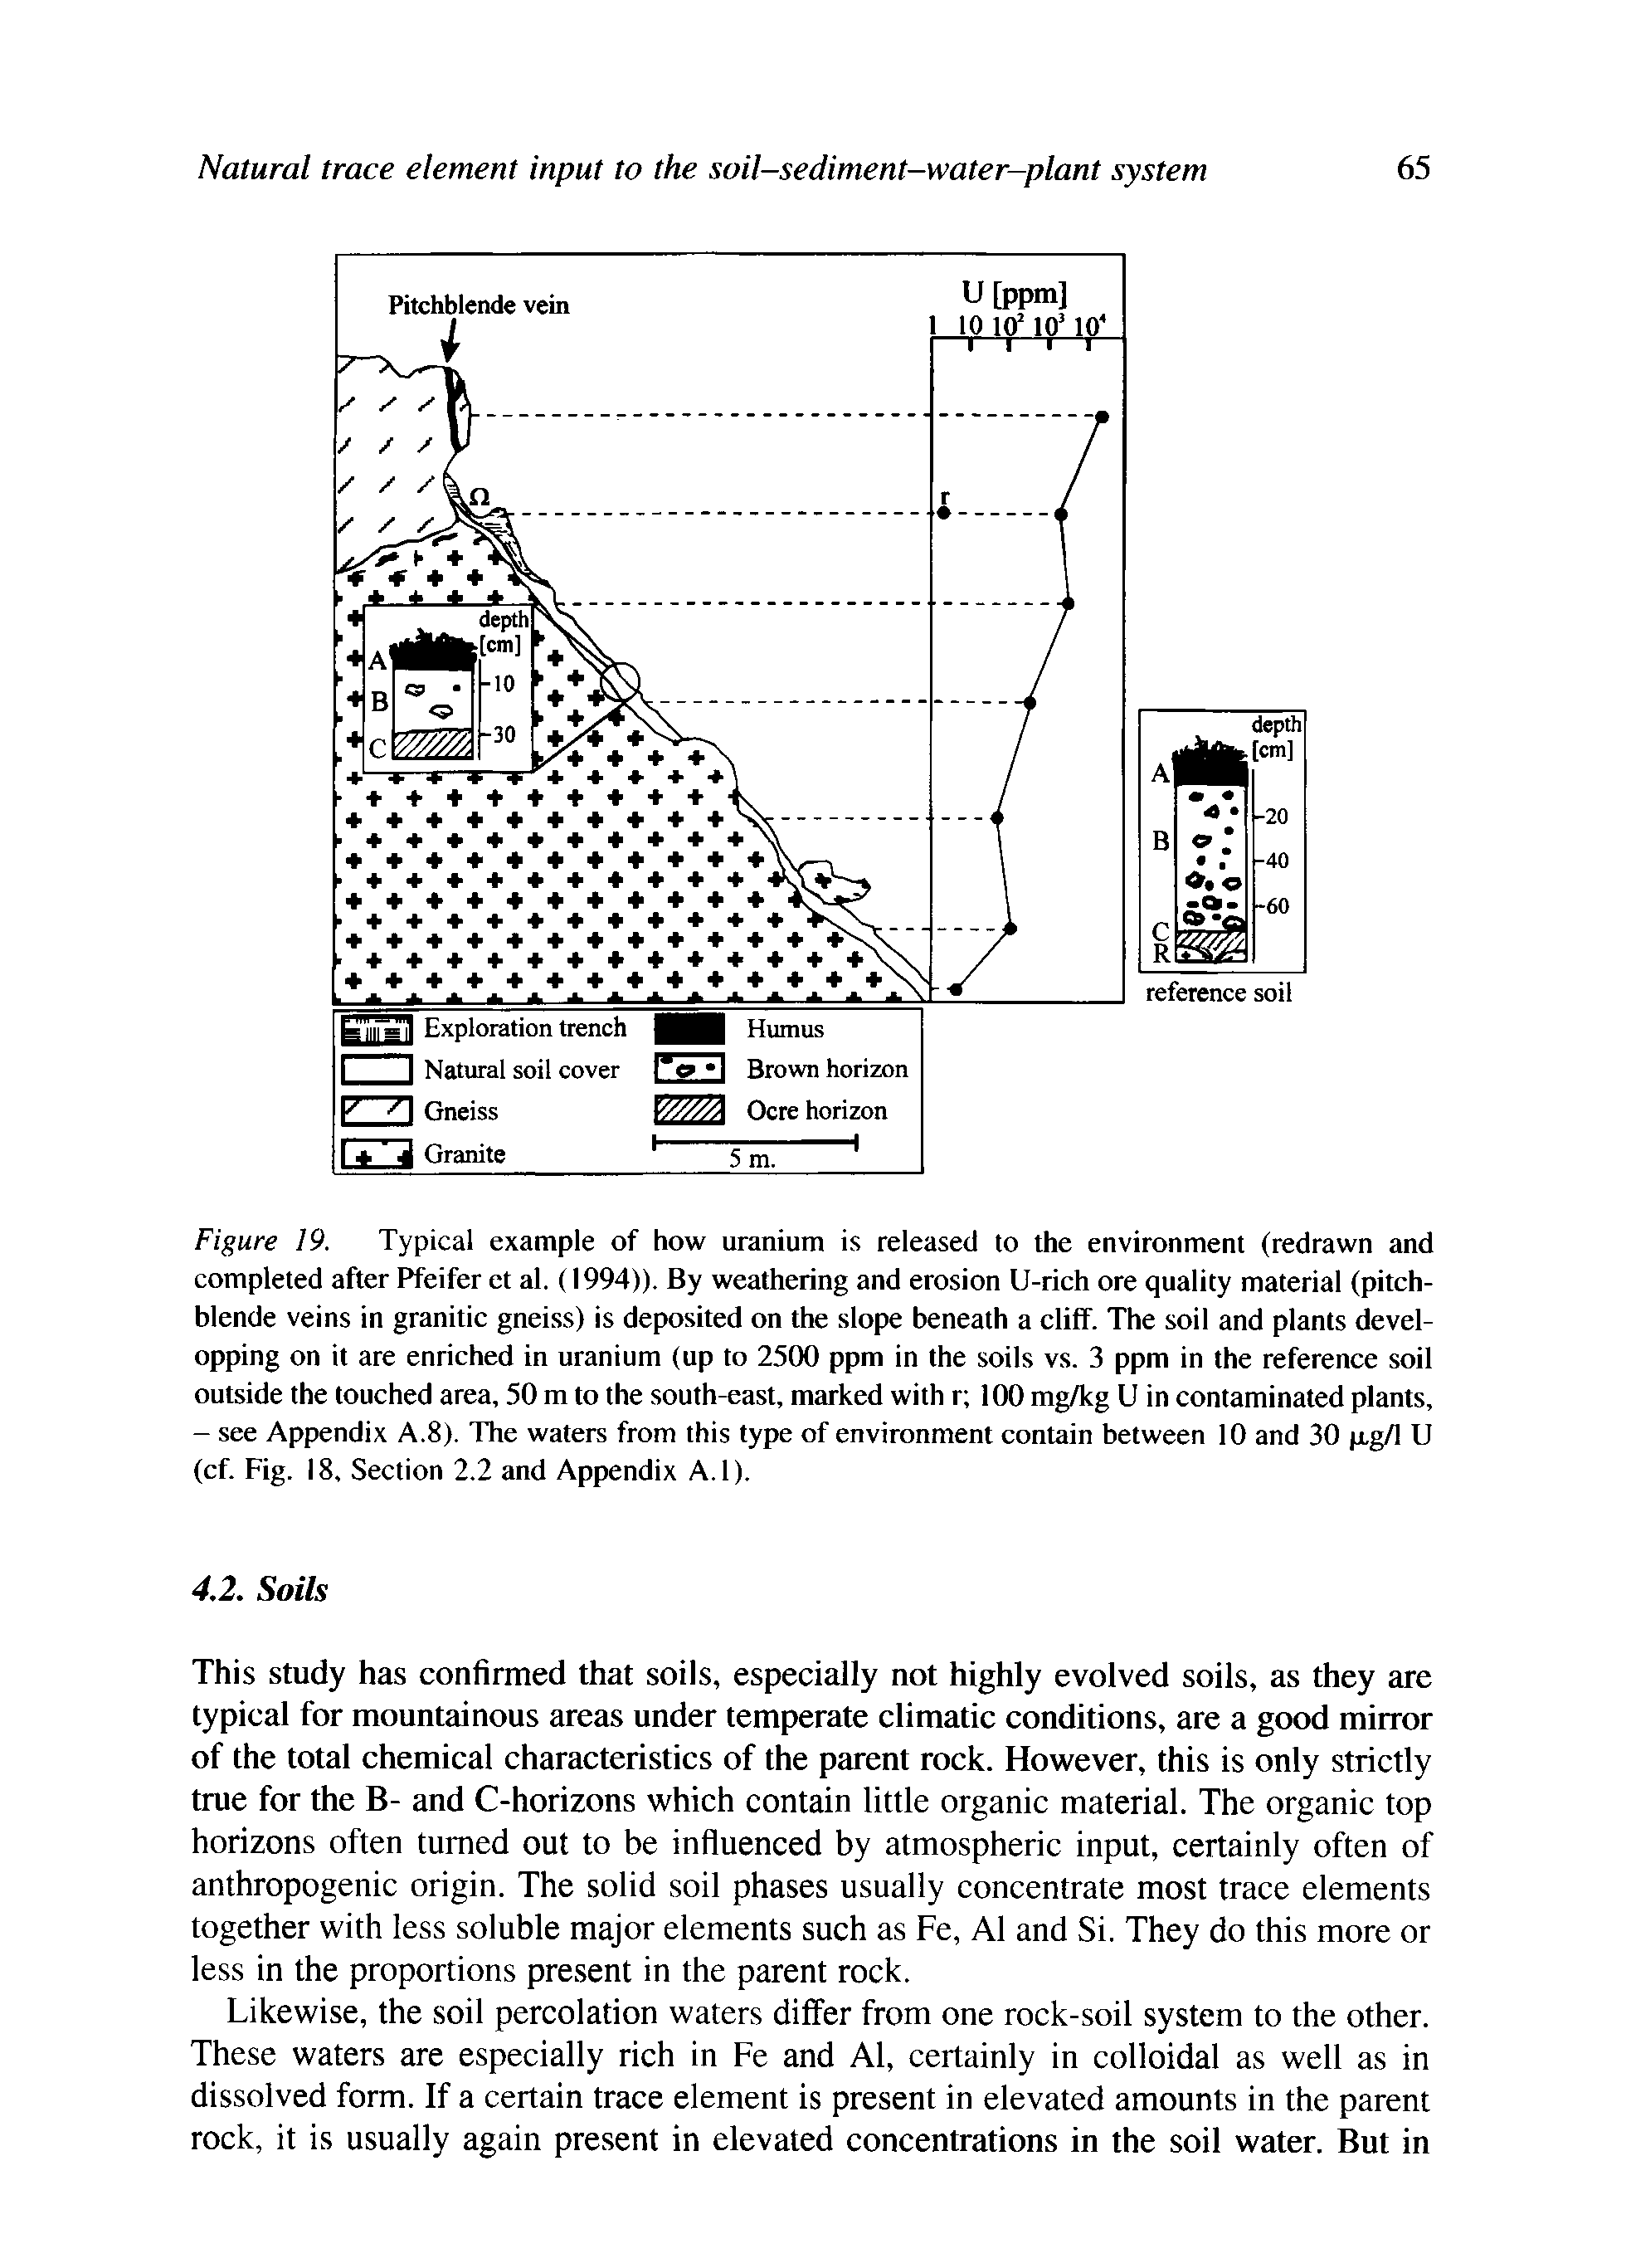 Figure 19. Typical example of how uranium is released to the environment (redrawn and completed after Pfeifer et al. (1994)). By weathering and erosion U-rich ore quality material (pitchblende veins in granitic gneiss) is deposited on the slope beneath a cliff. The soil and plants devel-opping on it are enriched in uranium (up to 2500 ppm in the soils vs. 3 ppm in the reference soil outside the touched area, 50 m to the south-east, marked with r 100 mg/kg U in contaminated plants, - see Appendix A.8). The waters from this type of environment contain between 10 and 30 jxg/l U (cf. Fig. 18, Section 2.2 and Appendix A. 1).